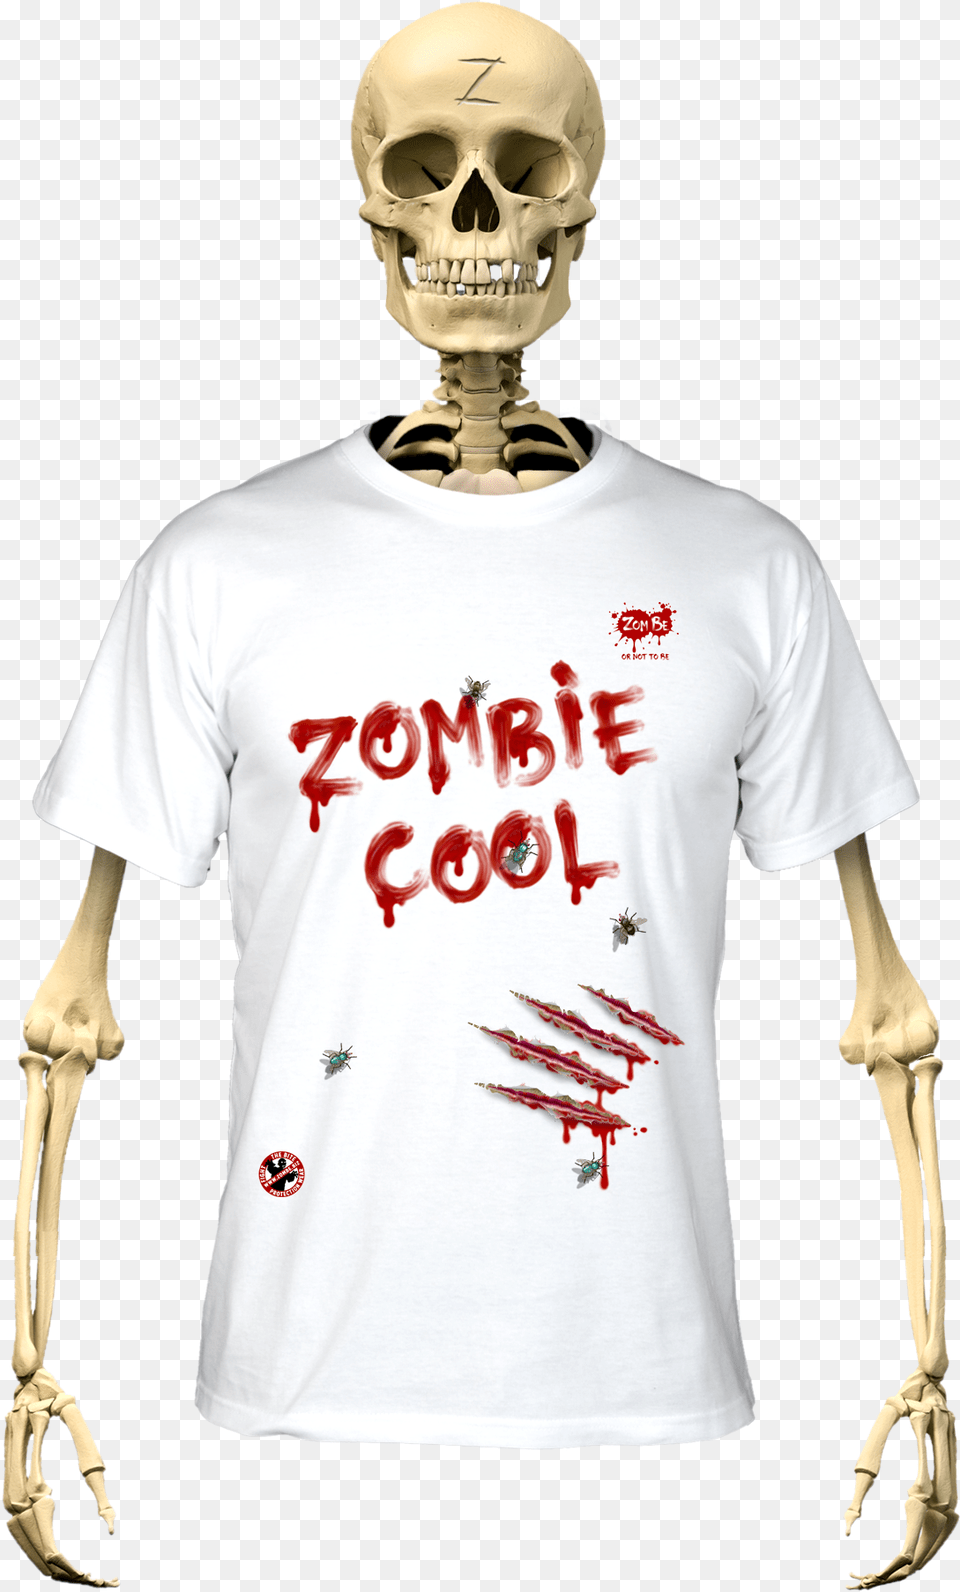 Zombe T Shirt Anti Zombie Zombie Cool For Childrenquot Skeleton Wearing T Shirt, T-shirt, Clothing, Adult, Person Png